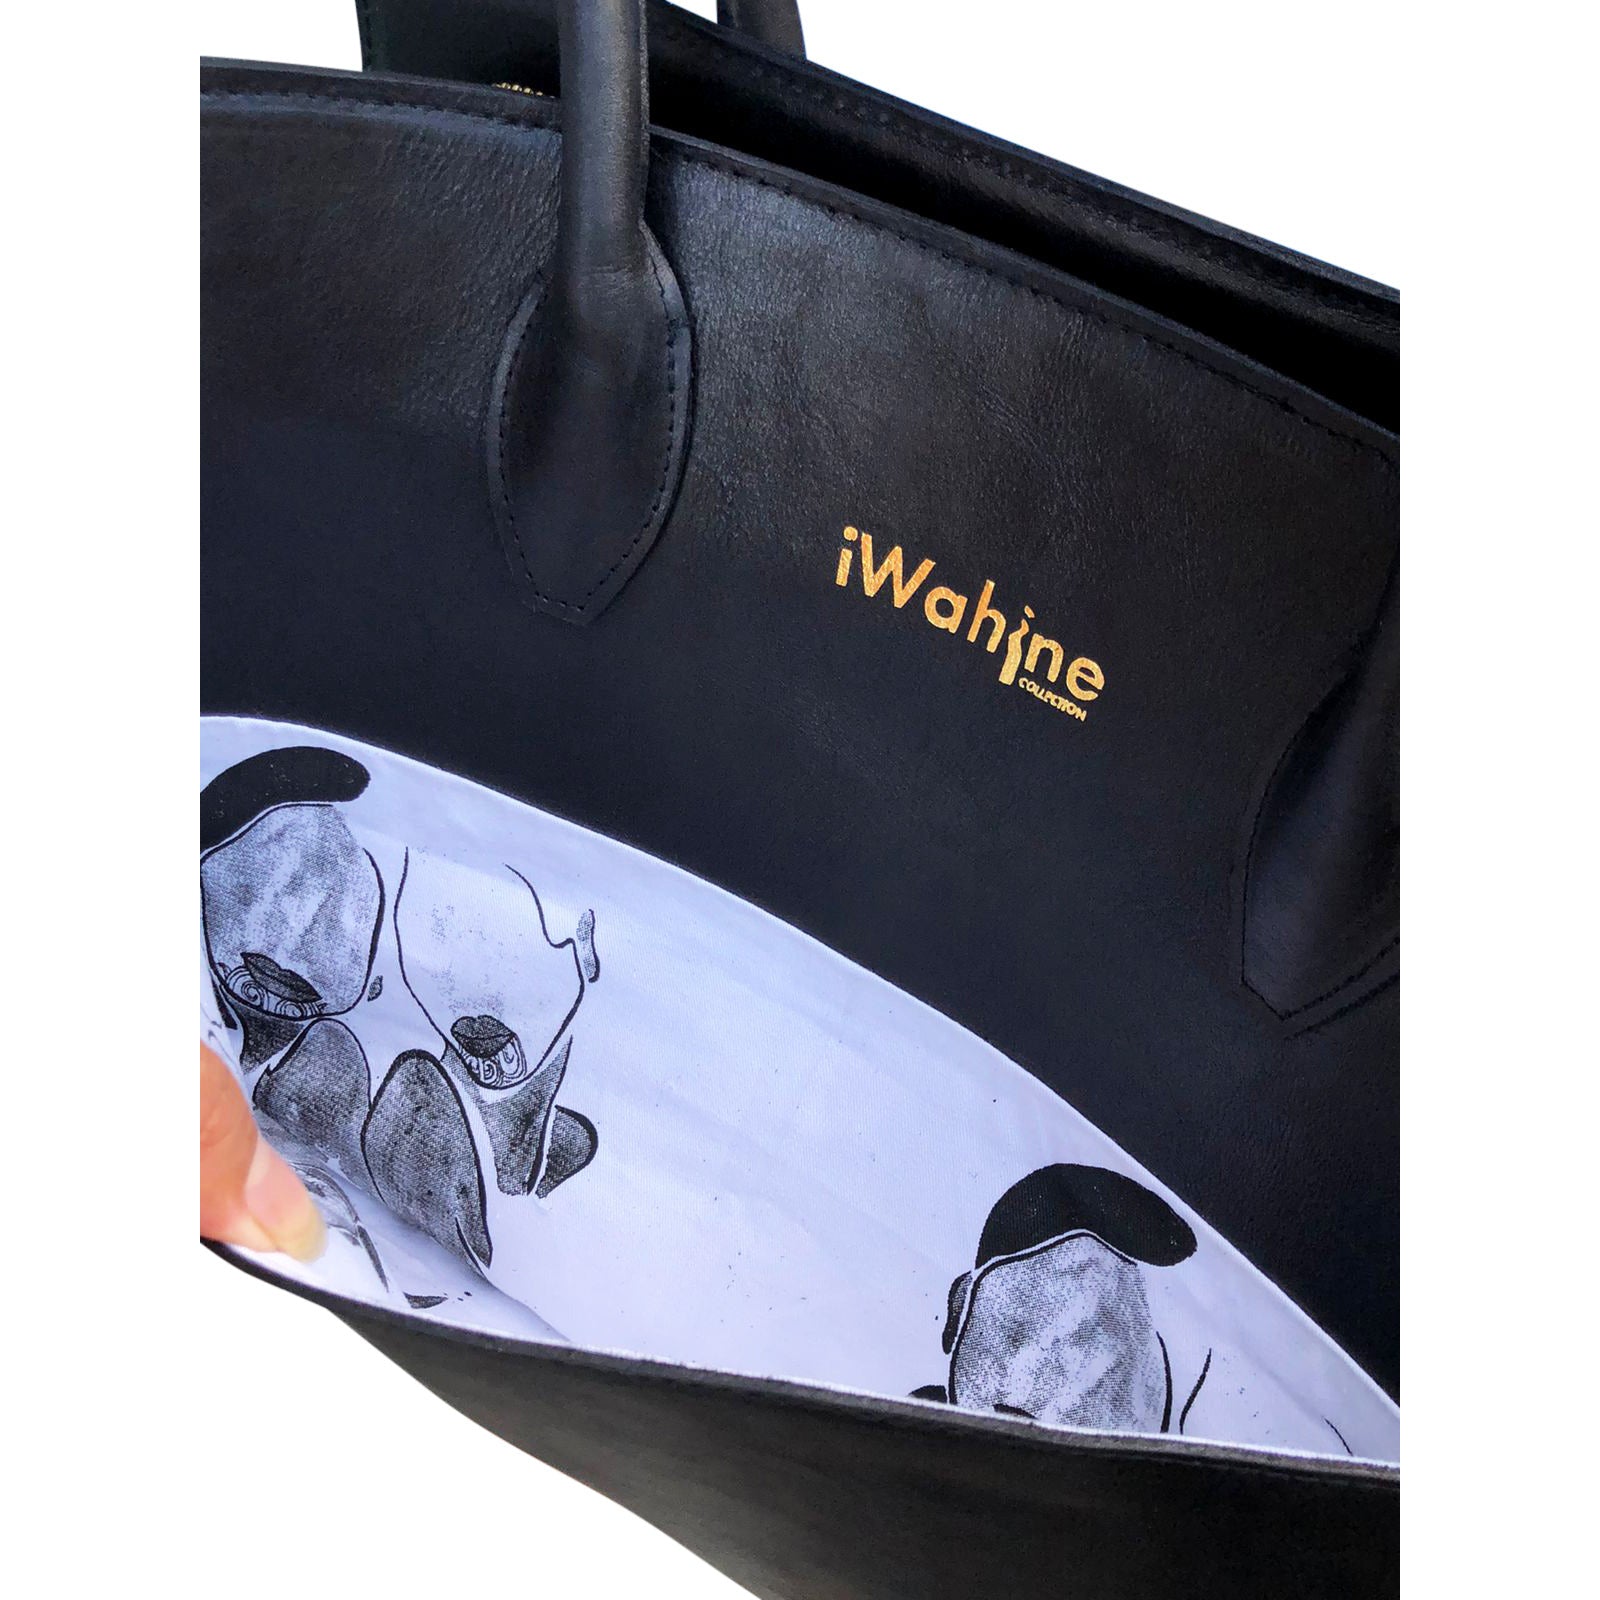 Class, luxury and sophistication with the Kahurangi Tote